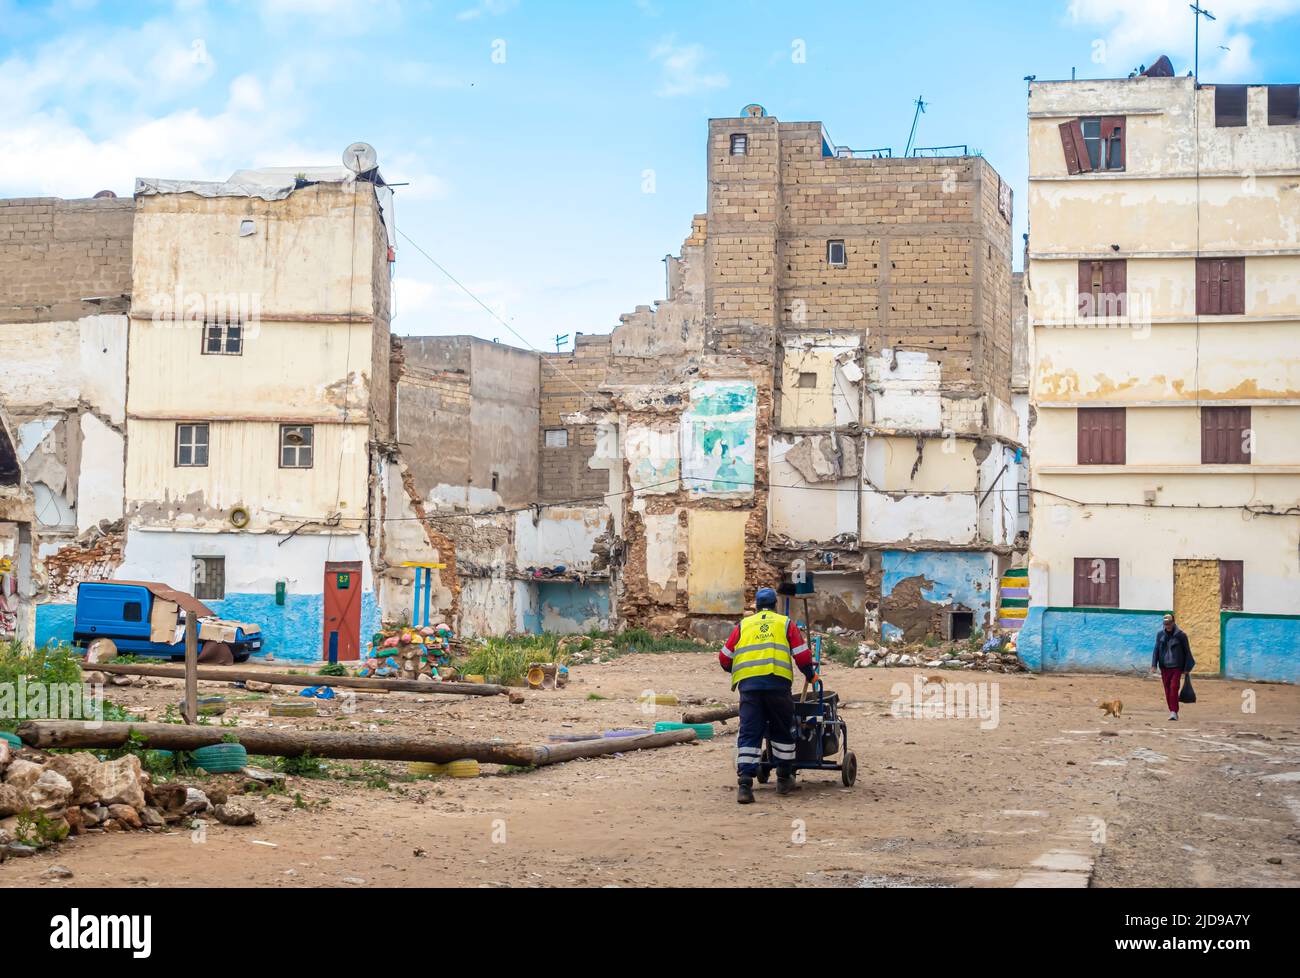 Serviceman pushing cart in the shabby yard inside neglected, undone, shabby residential blocks buildings in Bourgogne, Casablanca, Morocco Stock Photo